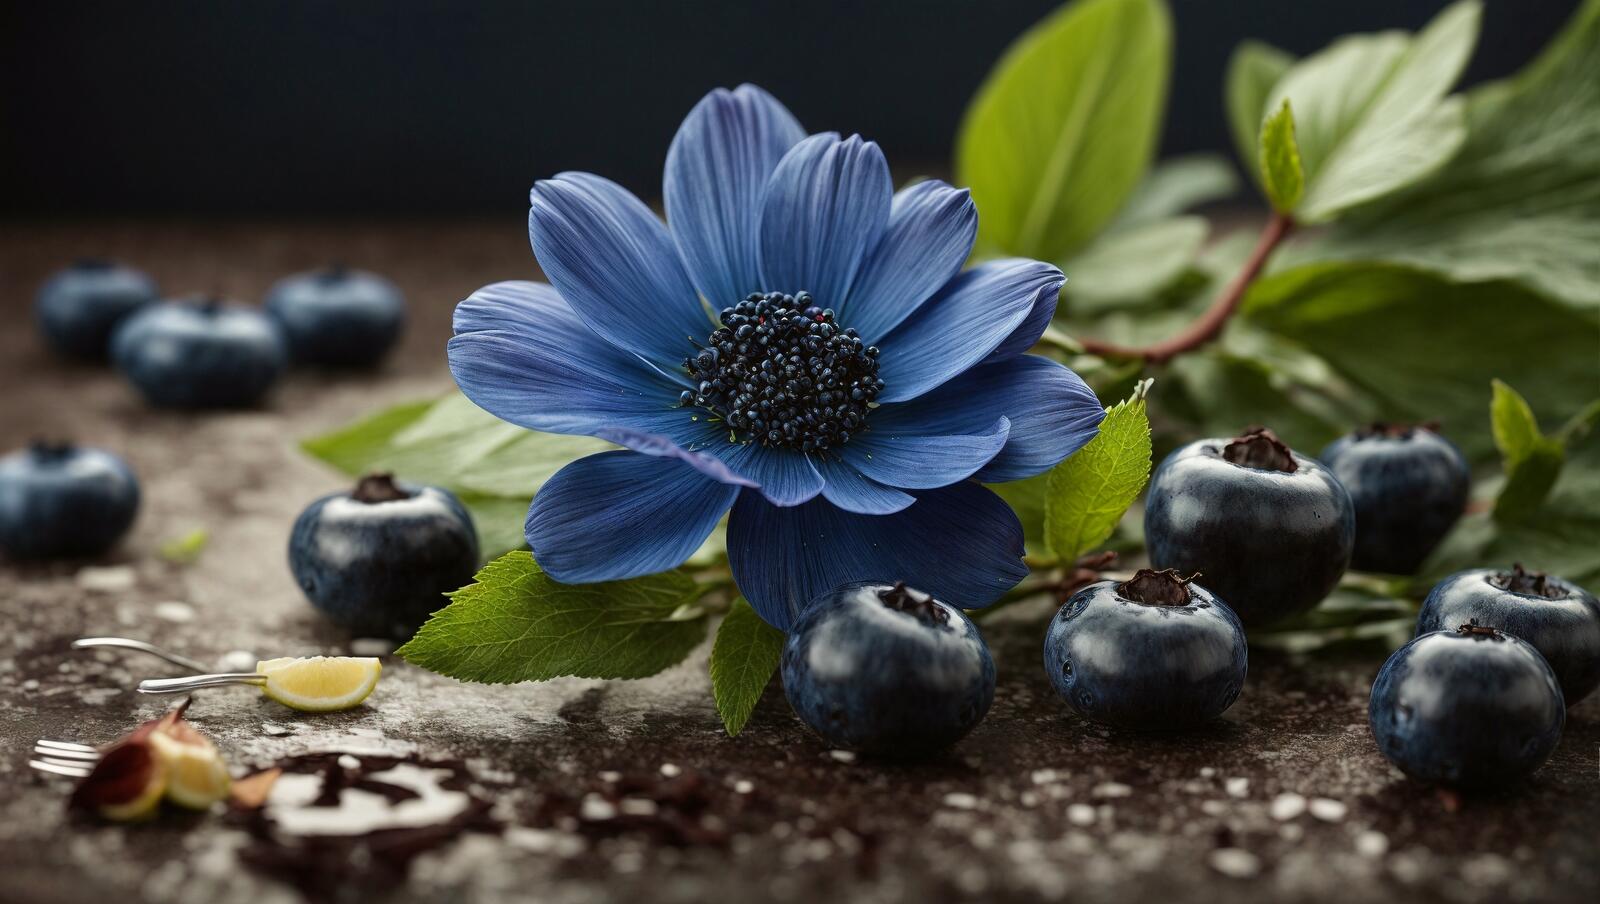 Free photo The blue flower is on the ground next to small fruits and leaves